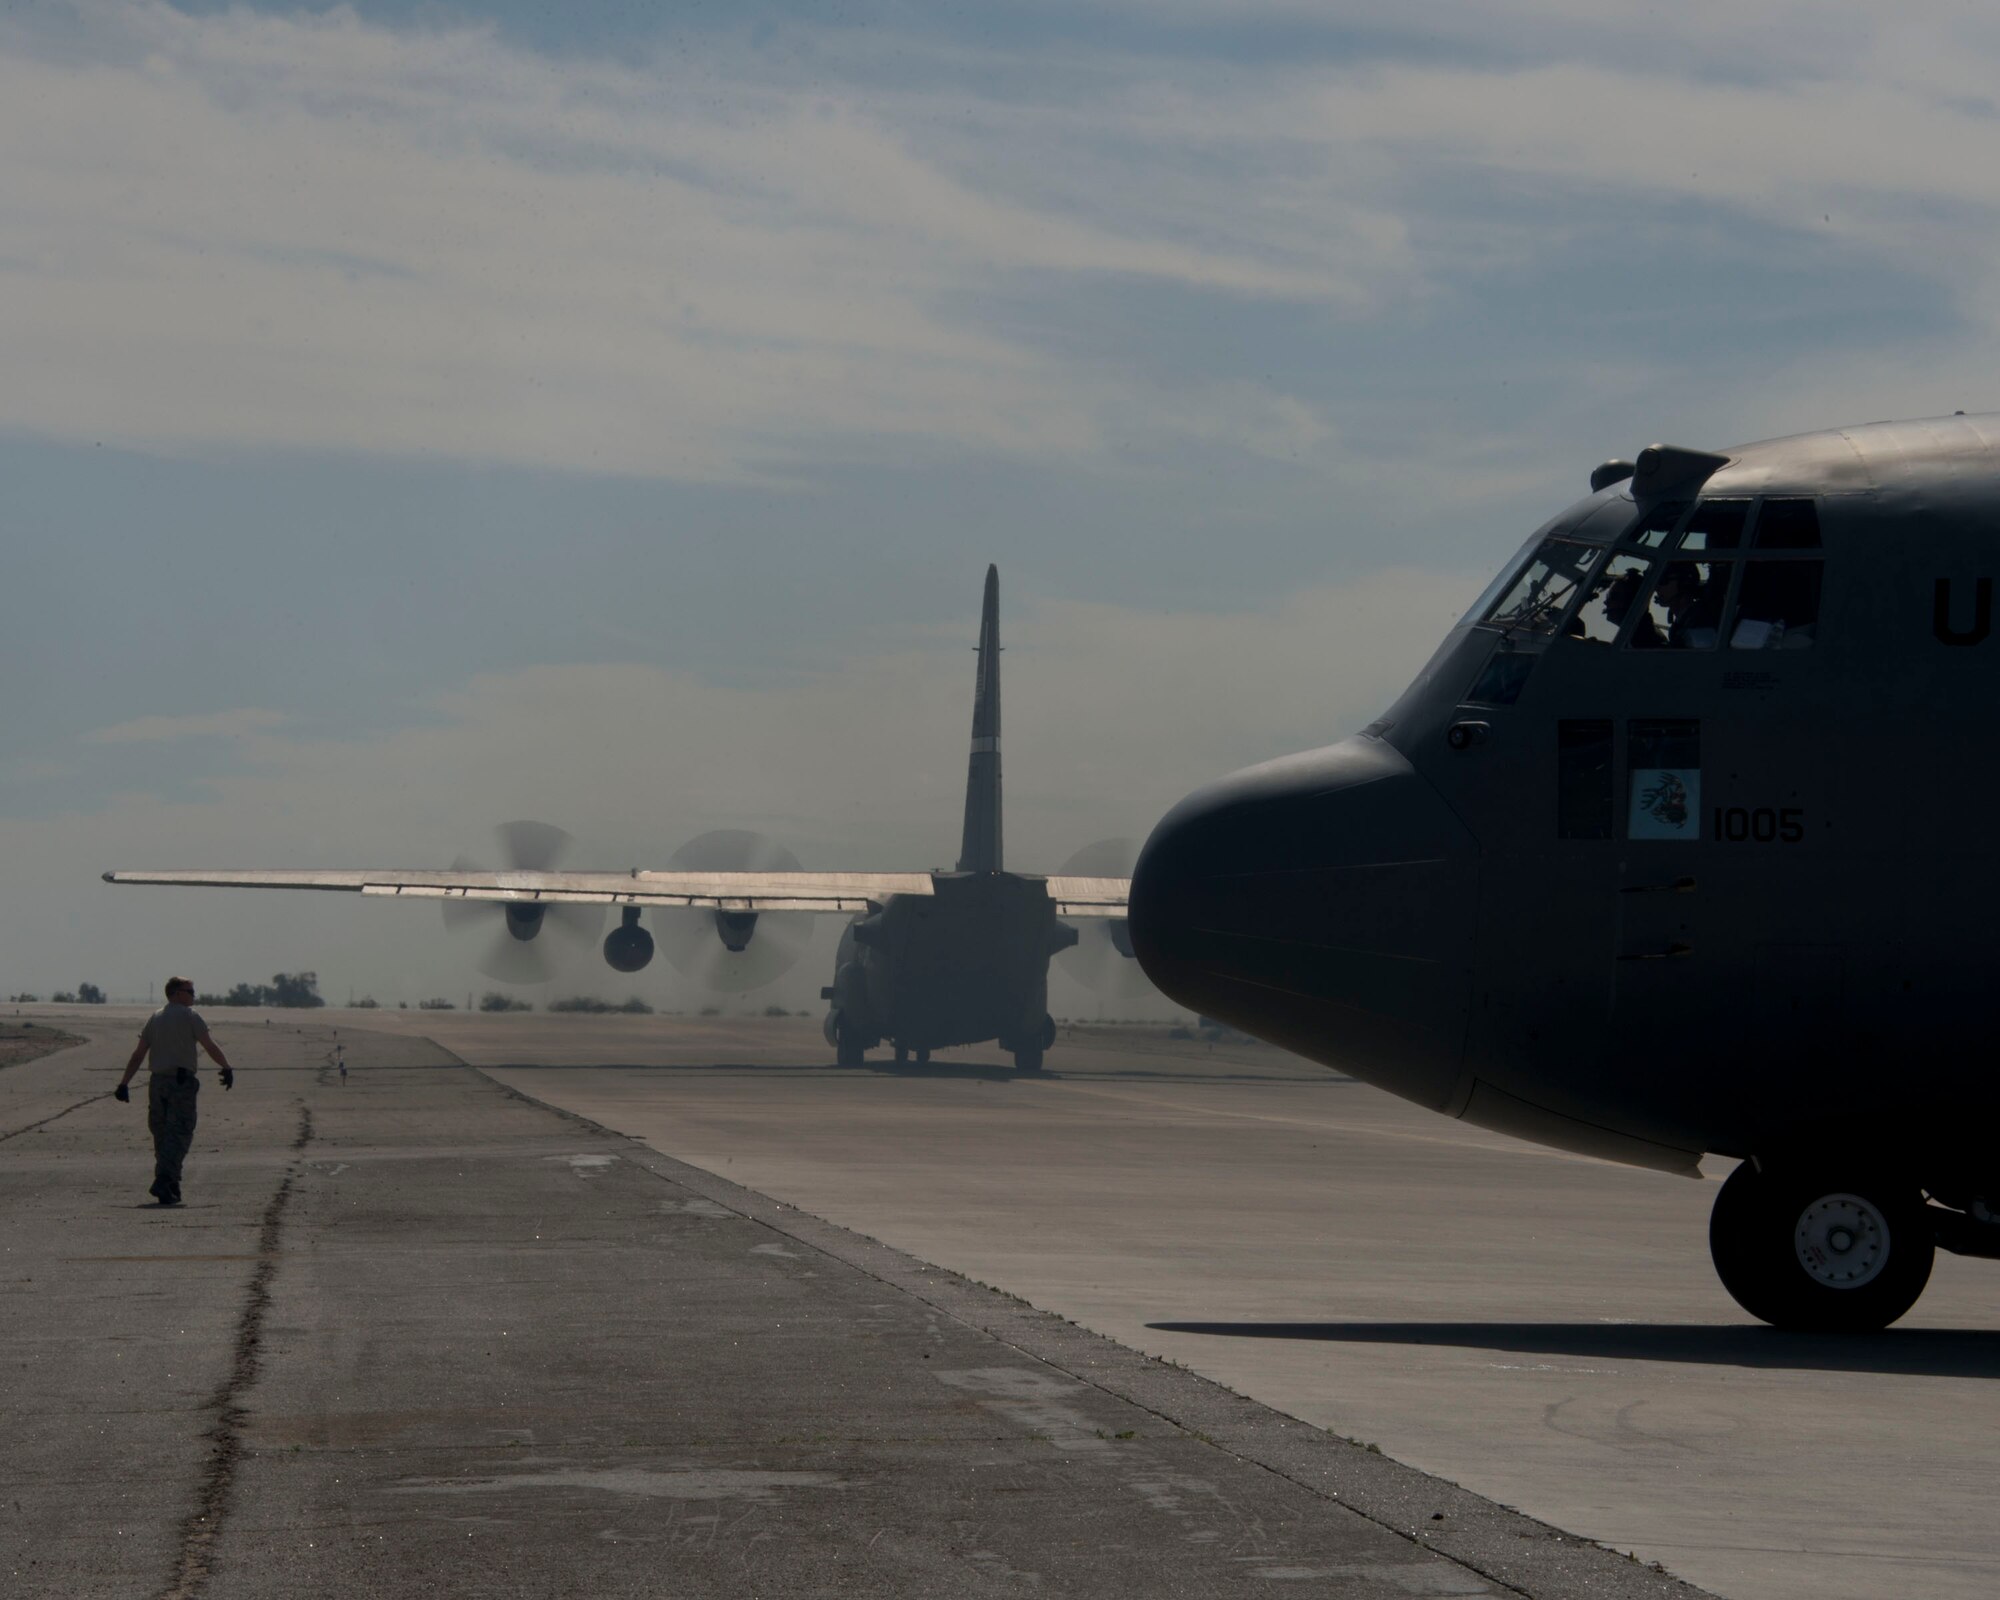 A Minnesota Air National Guard C-130 Hercules taxis off the Marine Corps Air Station ramp in Yuma, Ariz. Feb. 26, 2014. Airmen from the 133rd Airlift Wing and 109th Airlift Squadron are making use of the warm climate to accomplish six-months of airdrops and other annual training requirements in a six-day time period.
(U.S. Air National Guard photo Tech. Sgt. Amy M. Lovgren/ Released) 